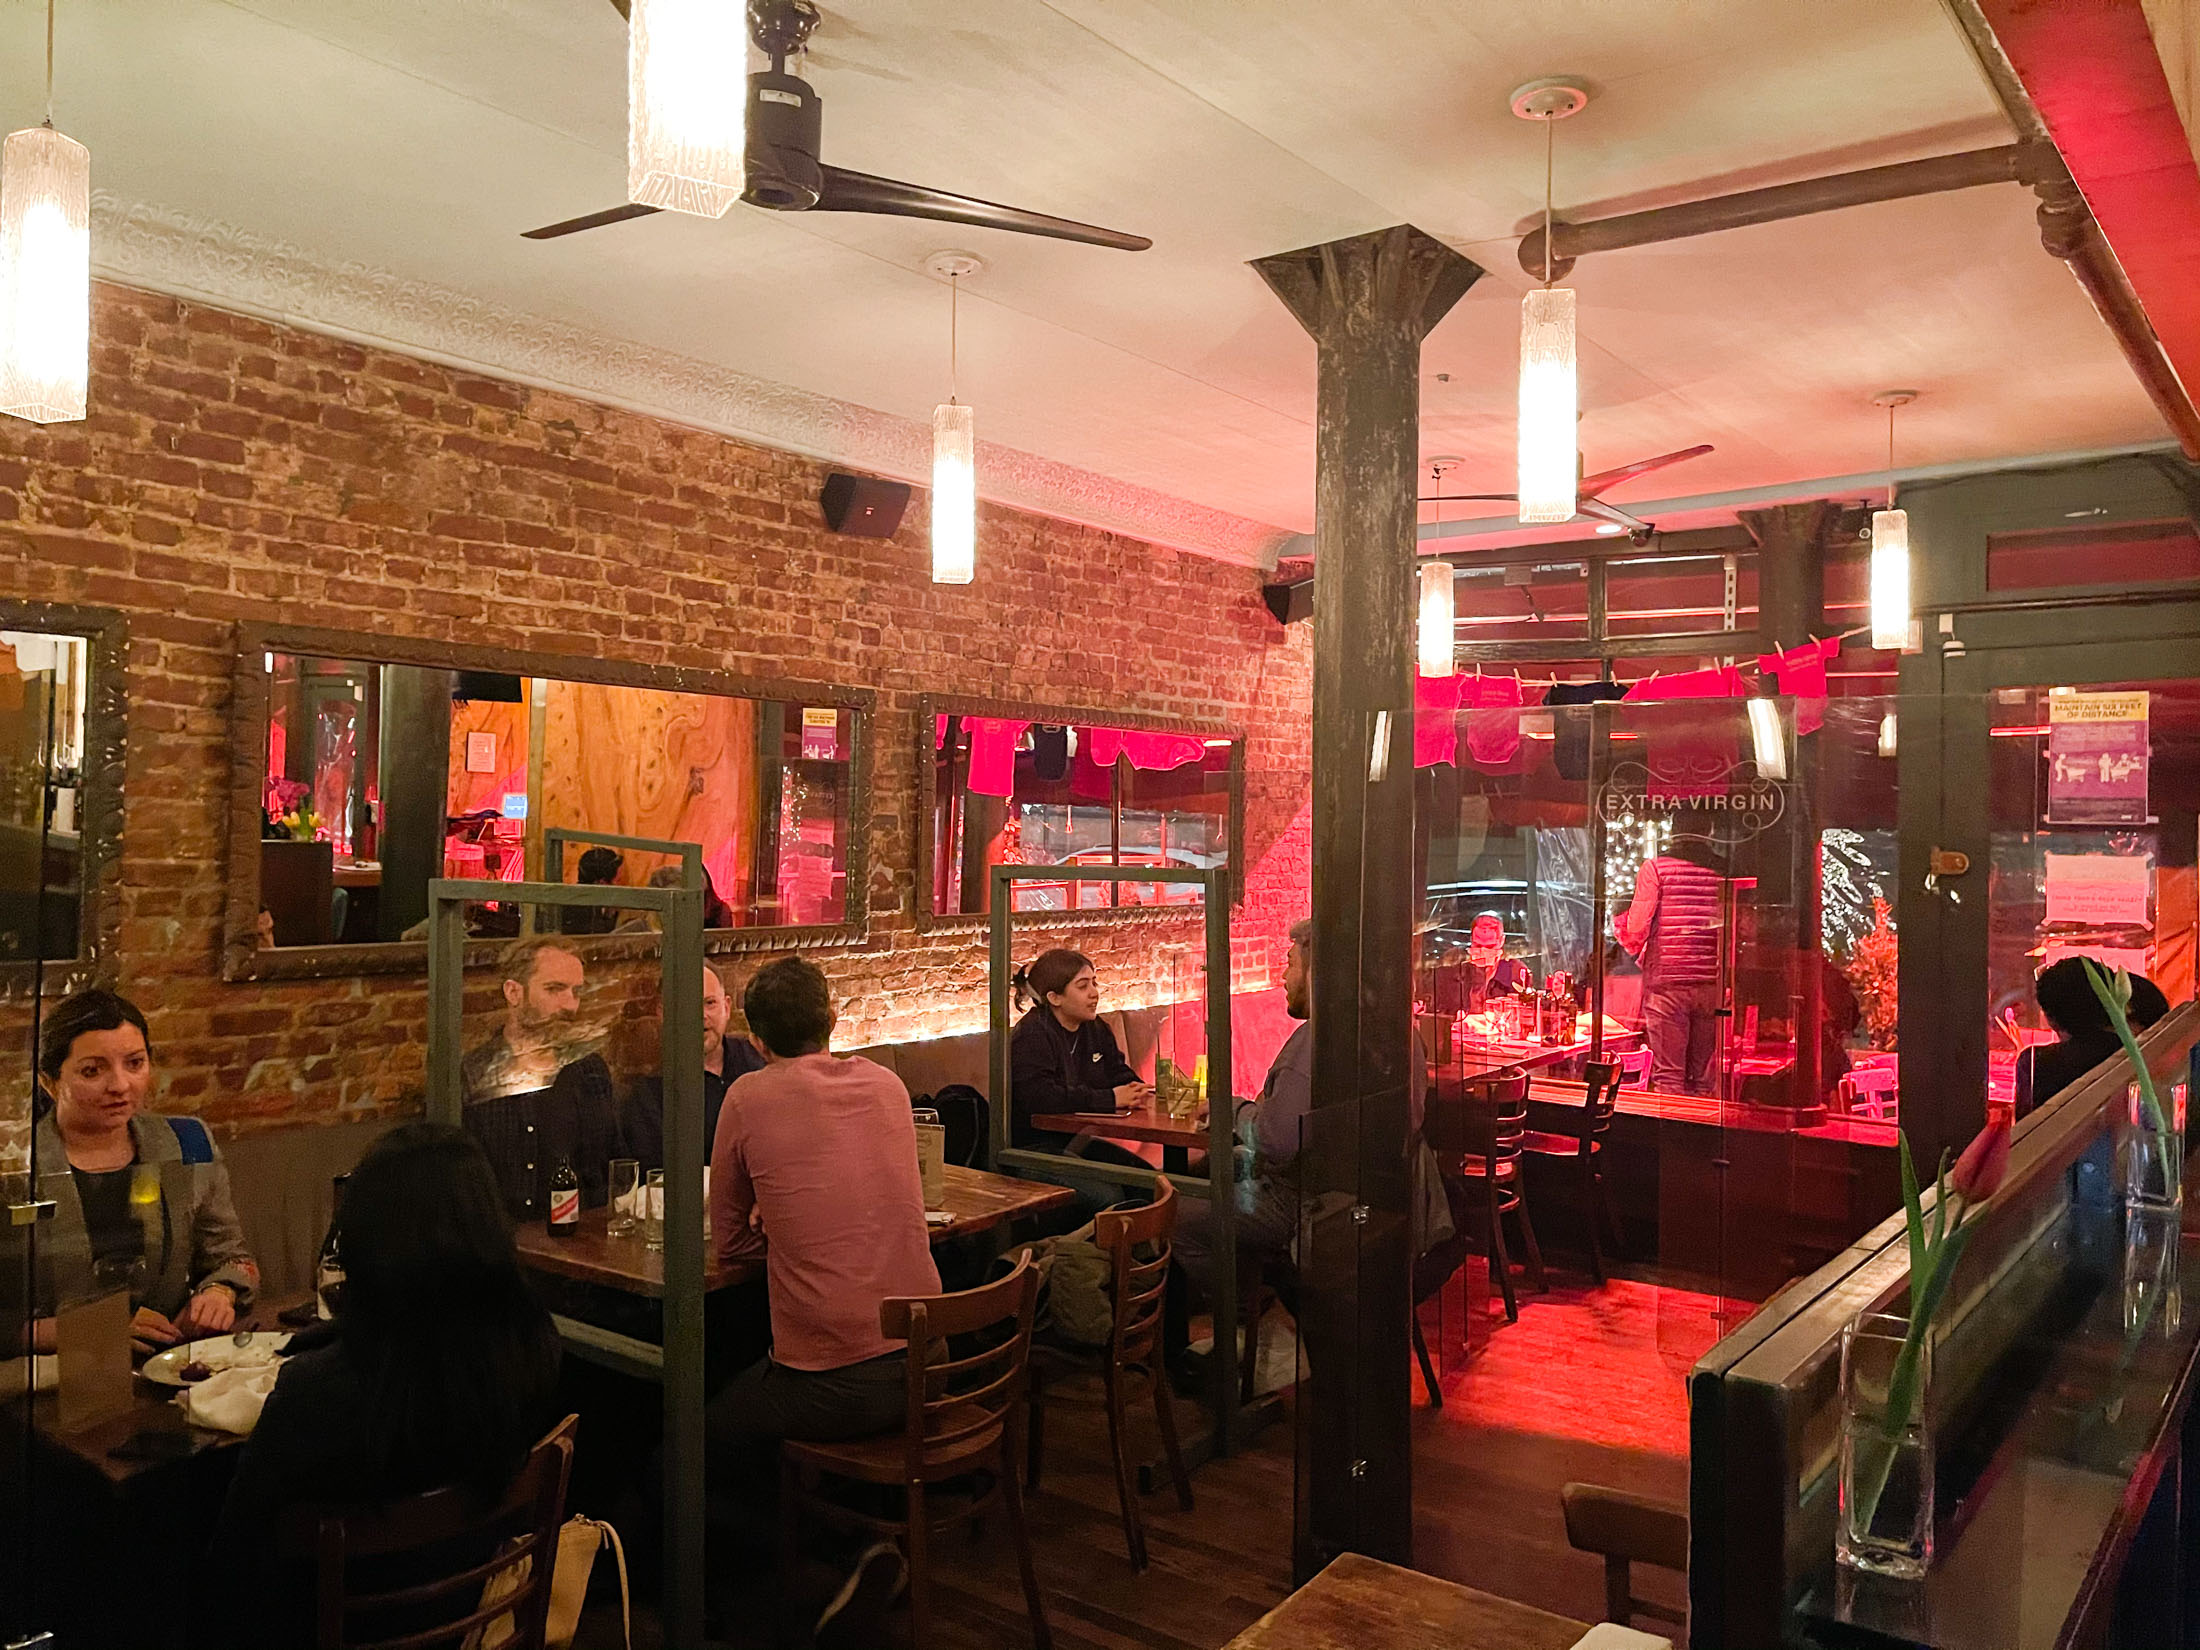 Find Paradise Lost bar's food and and drinks in the East Village